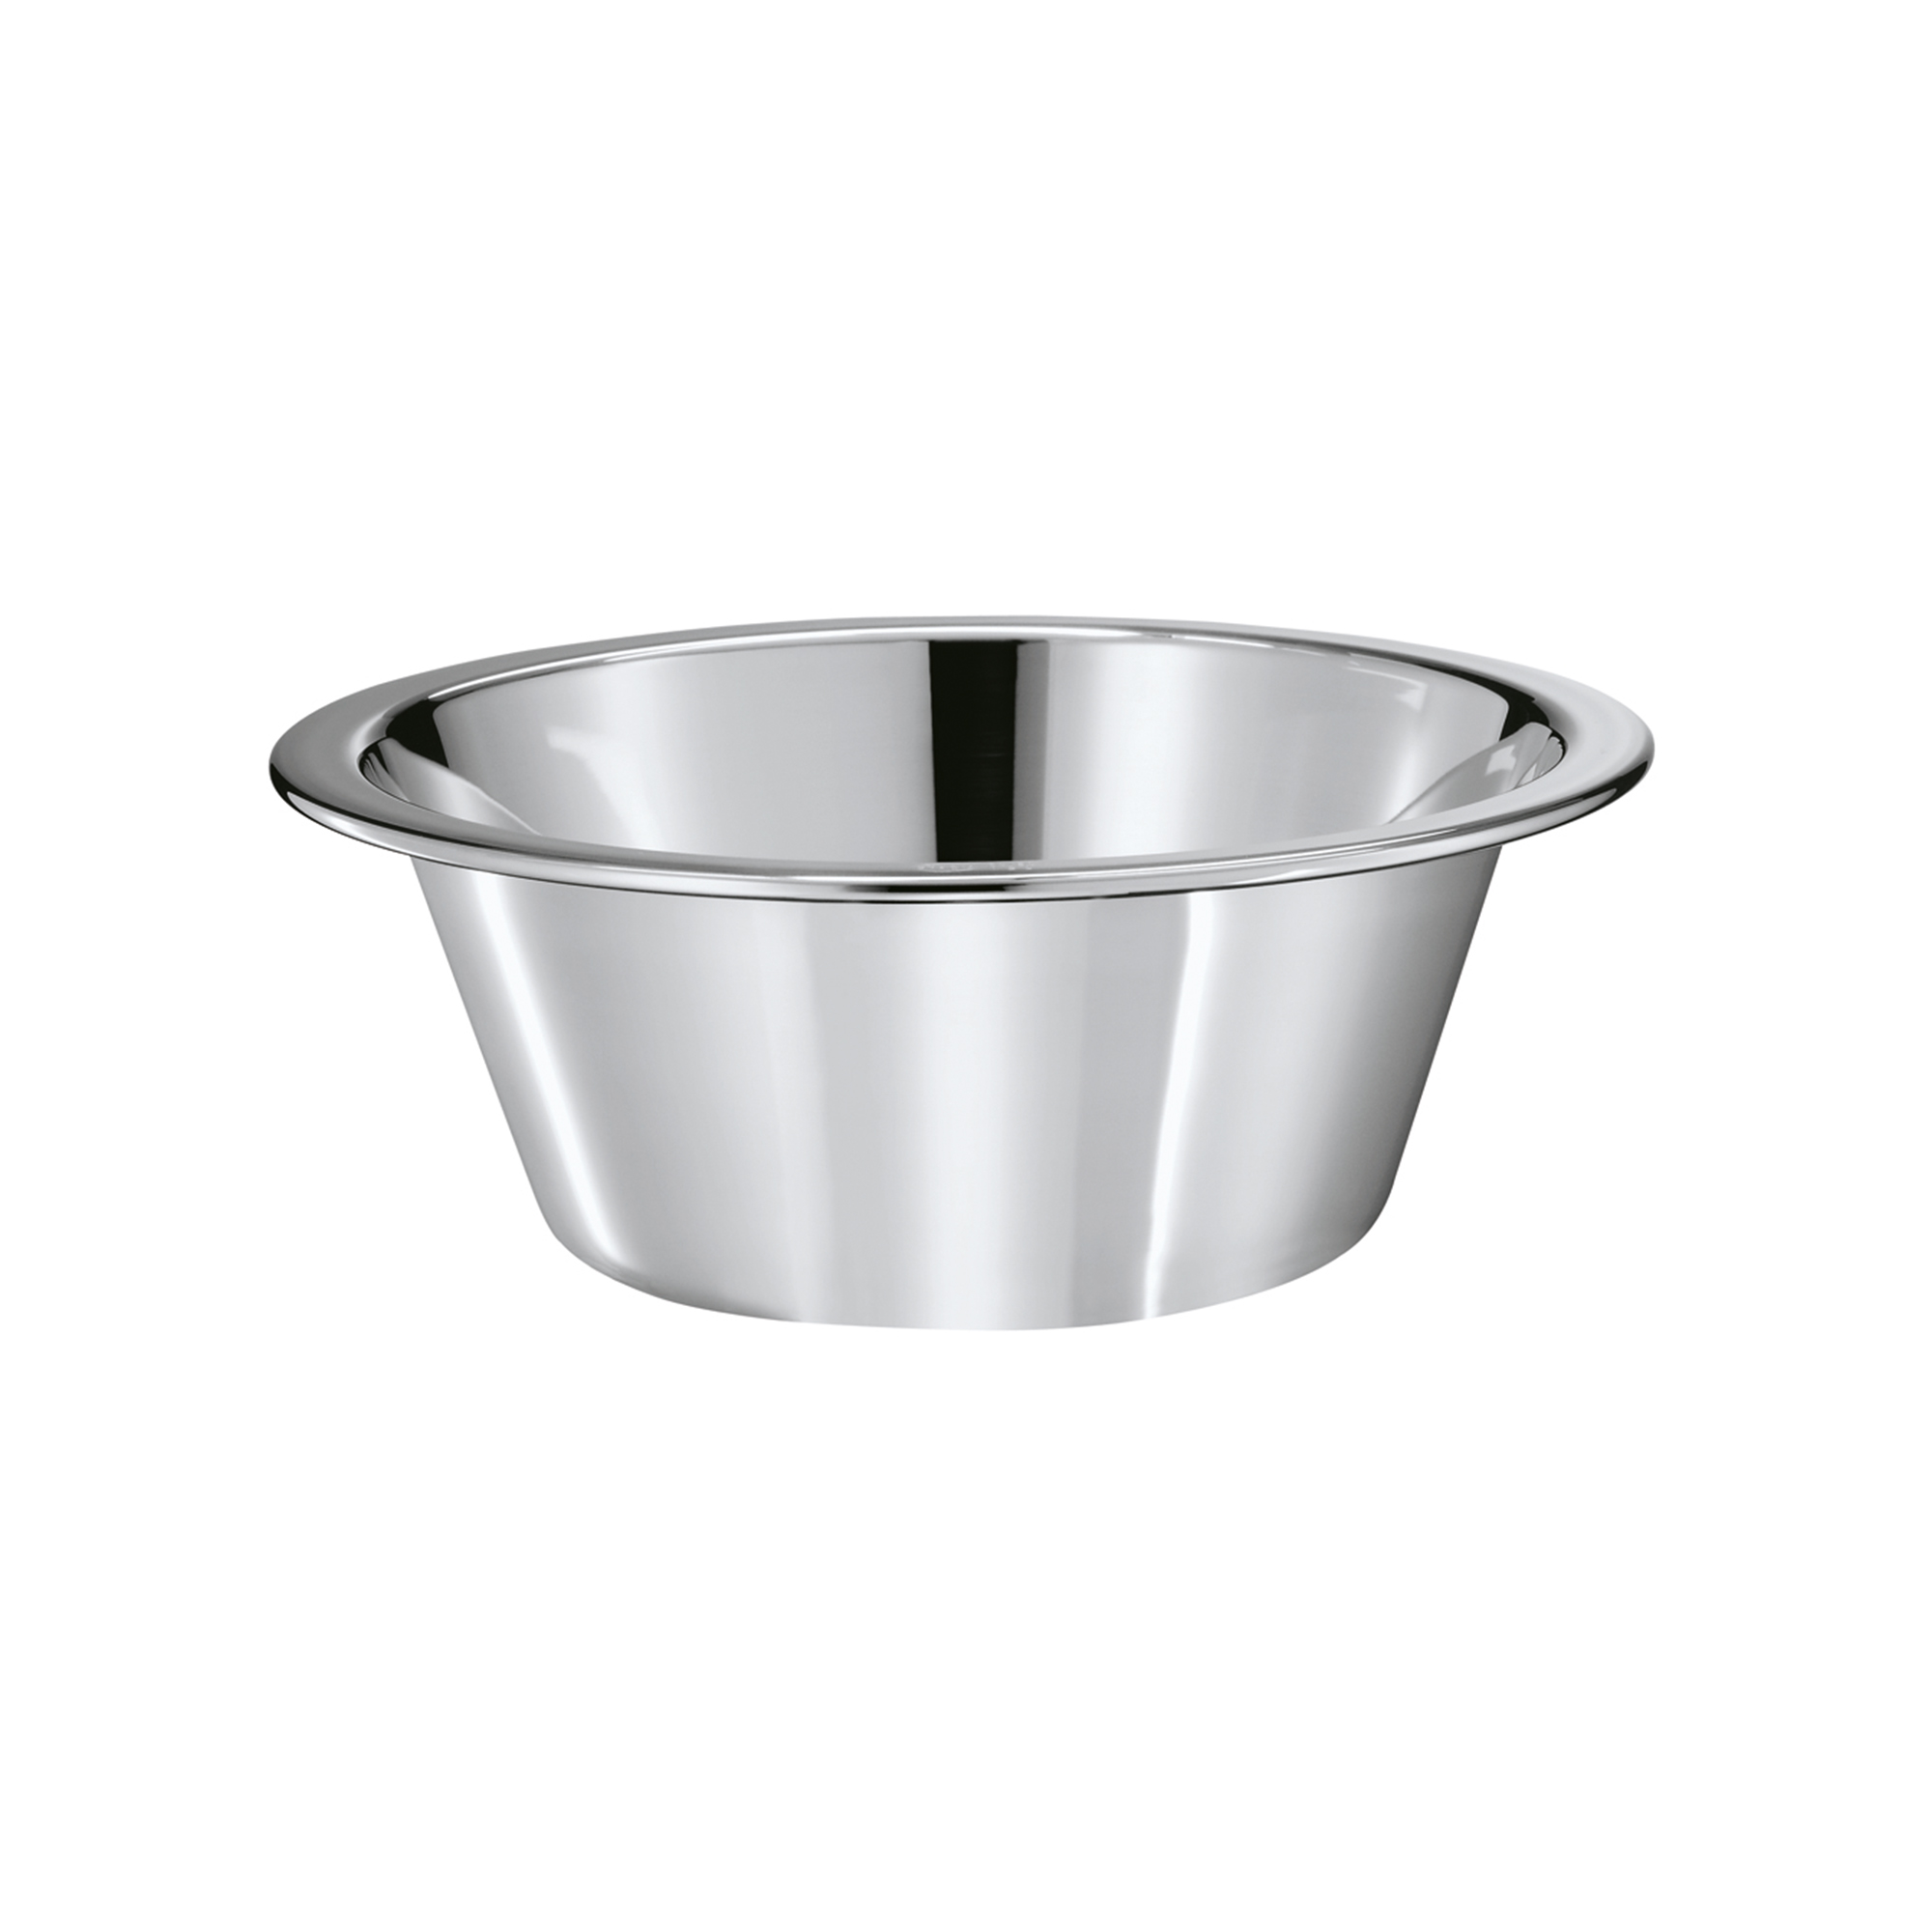 Conical Bowl Ø 31 cm|12.2 in.